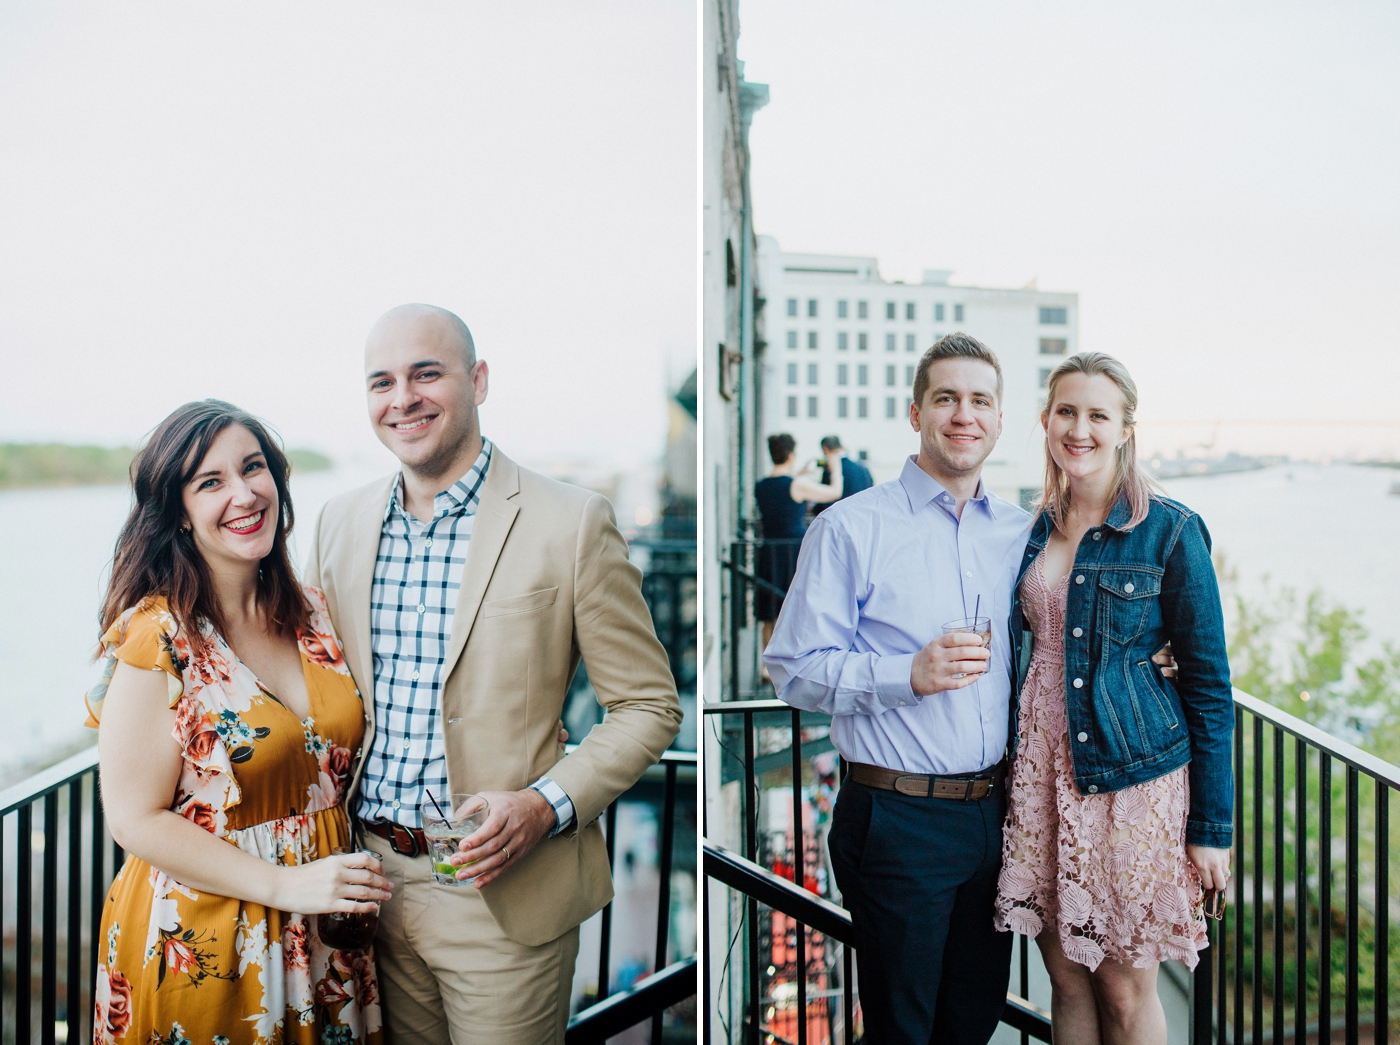 Spring wedding reception at Vic’s On The River | Izzy and Co.